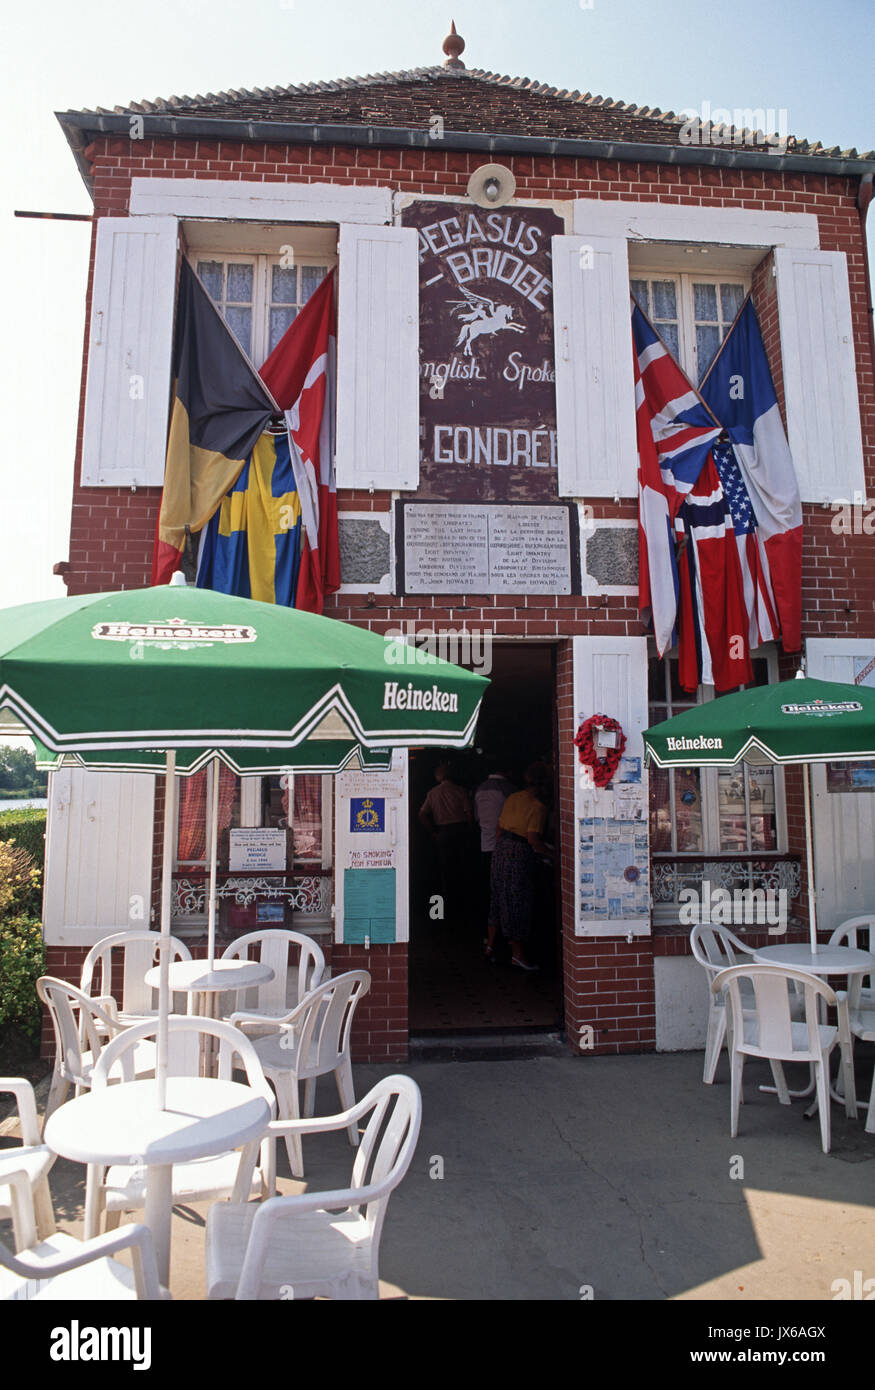 Pegasus Cafe, next to the Pegasus Bridge where there was fierce fighting by the British to keep the bridge open during the first days of the 6th of June Allied landings, Stock Photo